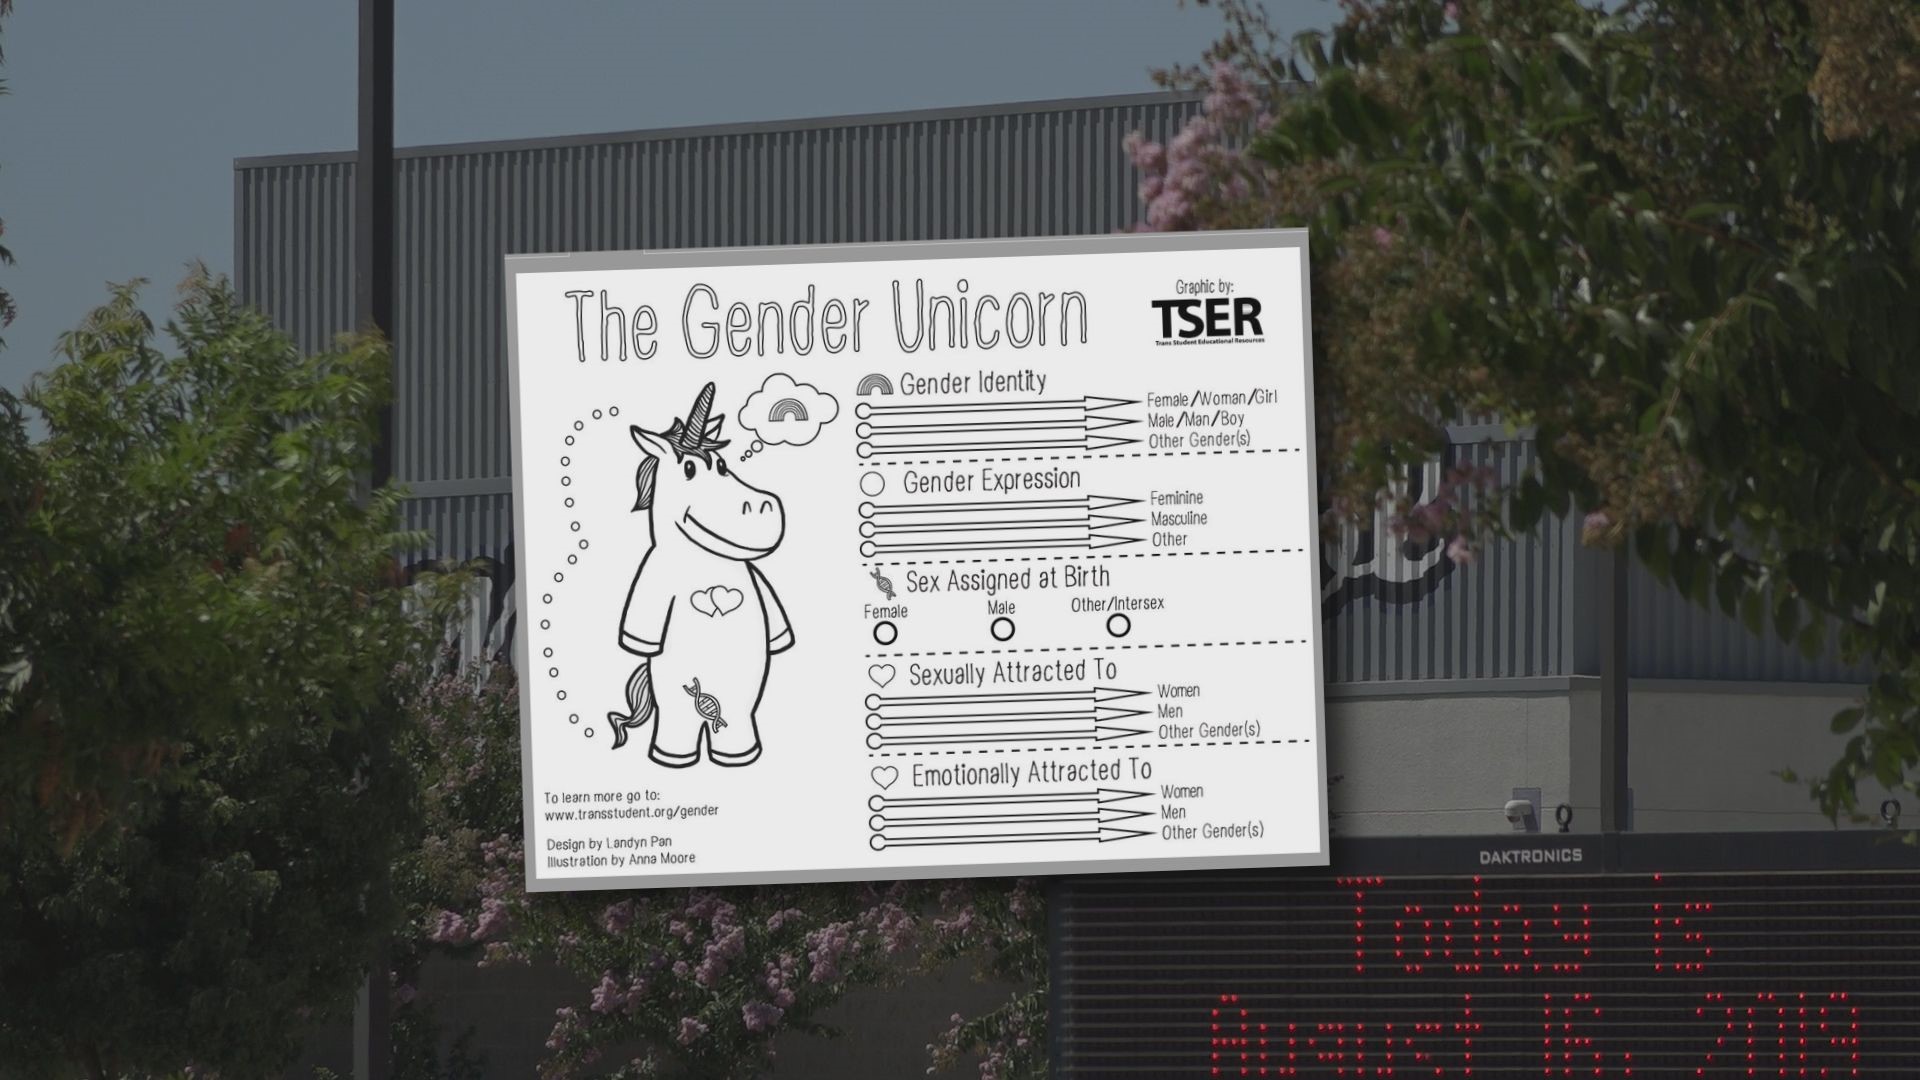 A Denair Middle School science teacher passed out the “Gender Unicorn” work-sheet to two periods of science students on the first day of class before a principal asked him to stop.